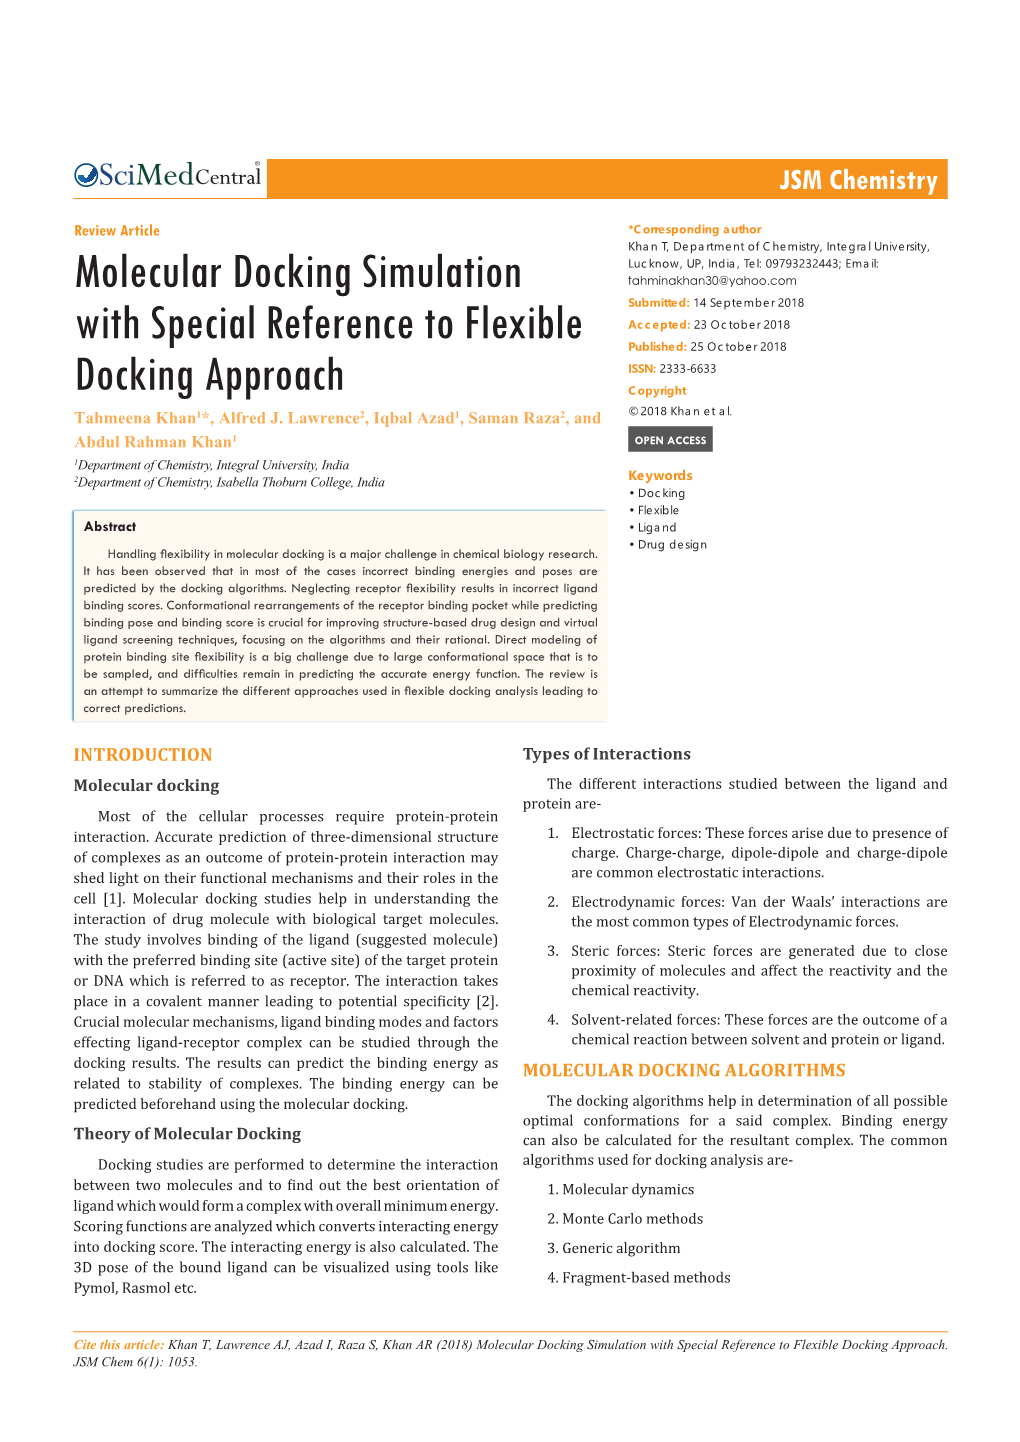 Molecular Docking Simulation with Special Reference to Flexible Docking Approach